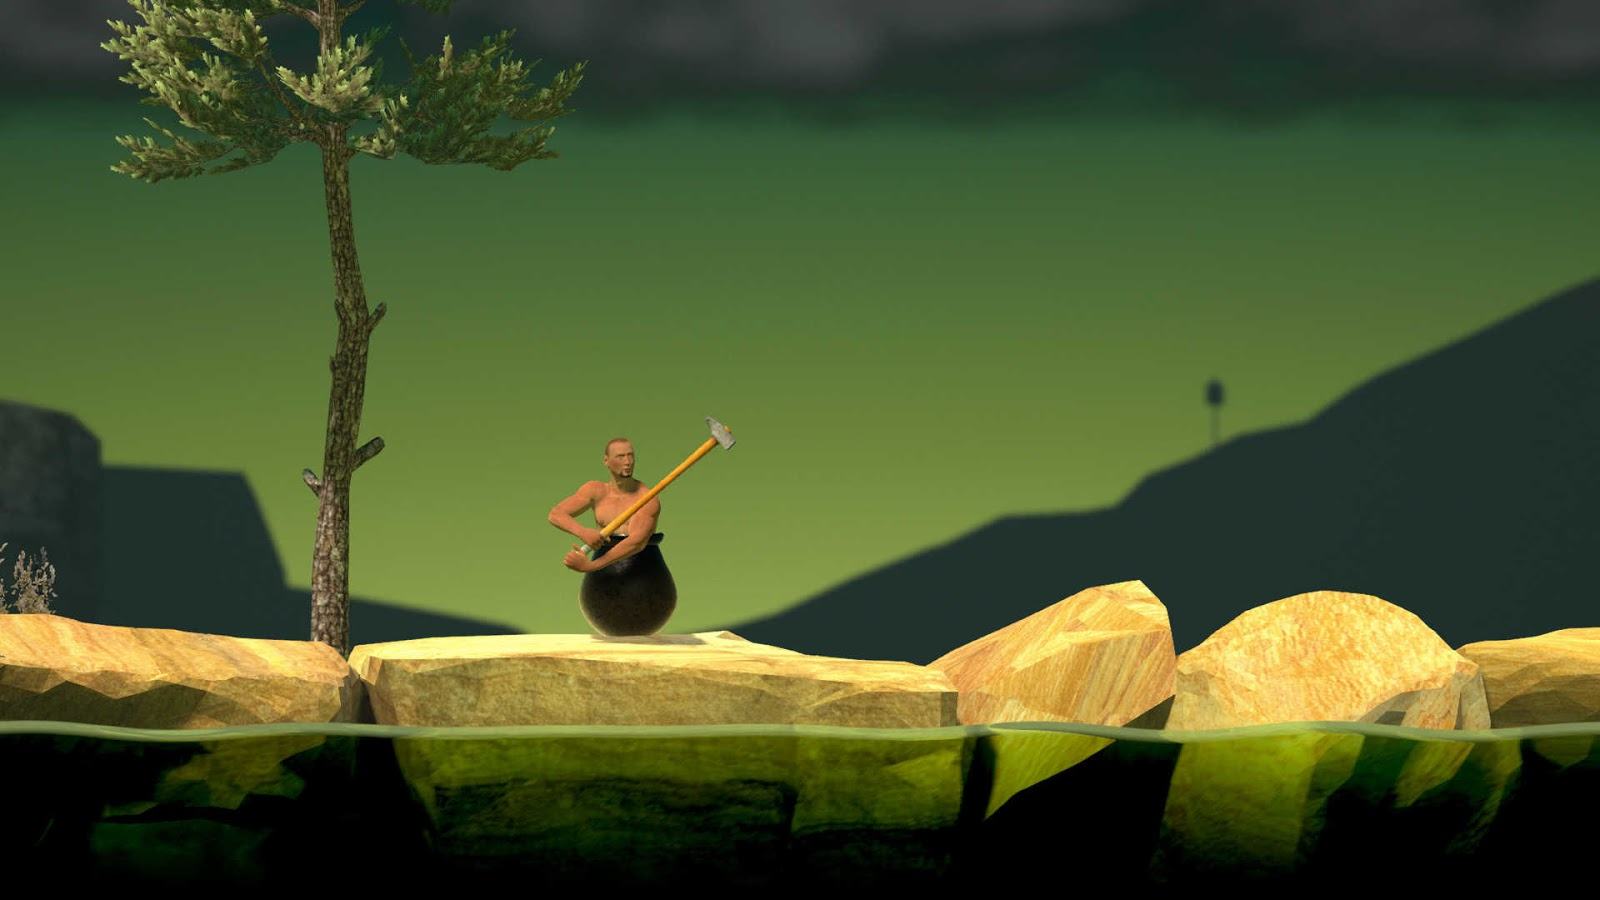 Getting Over It with Bennett Foddy 2